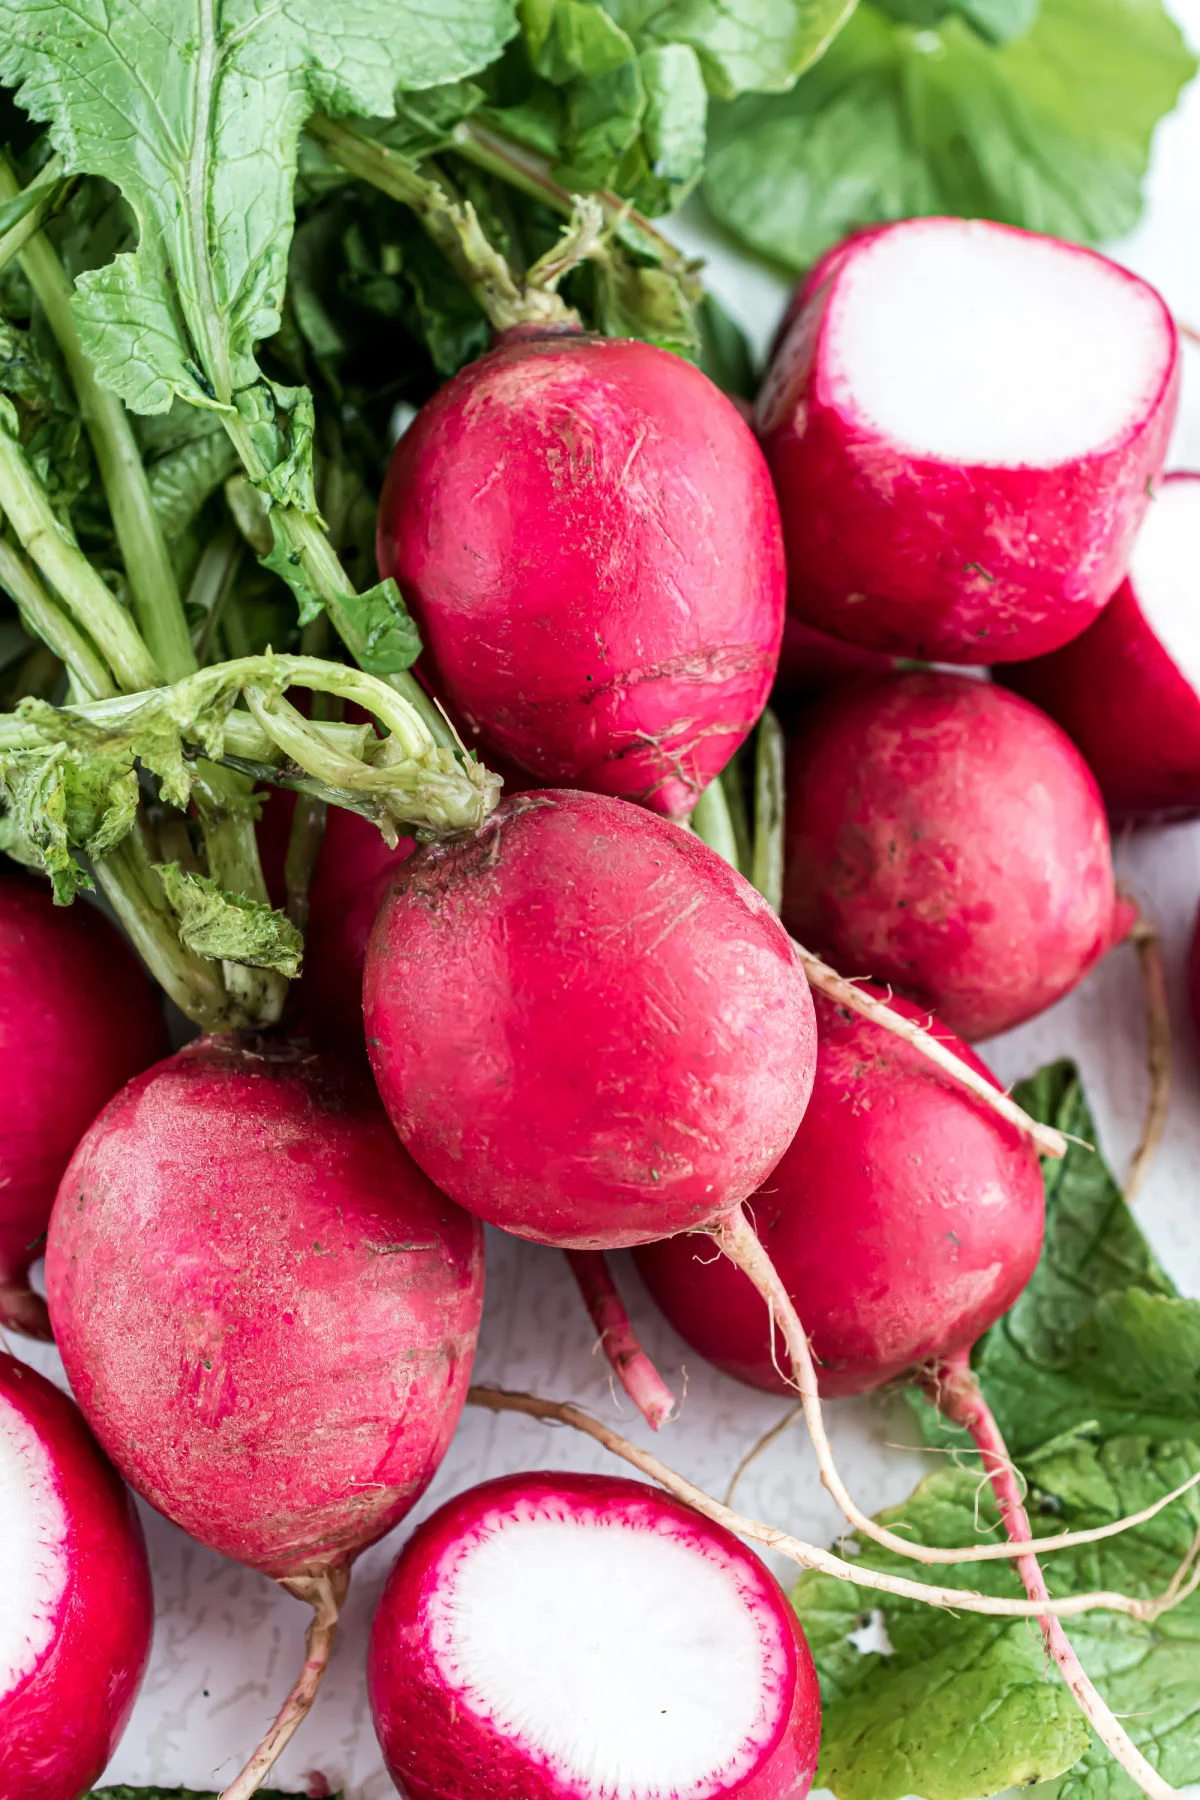 A bunch of radishes with stems.